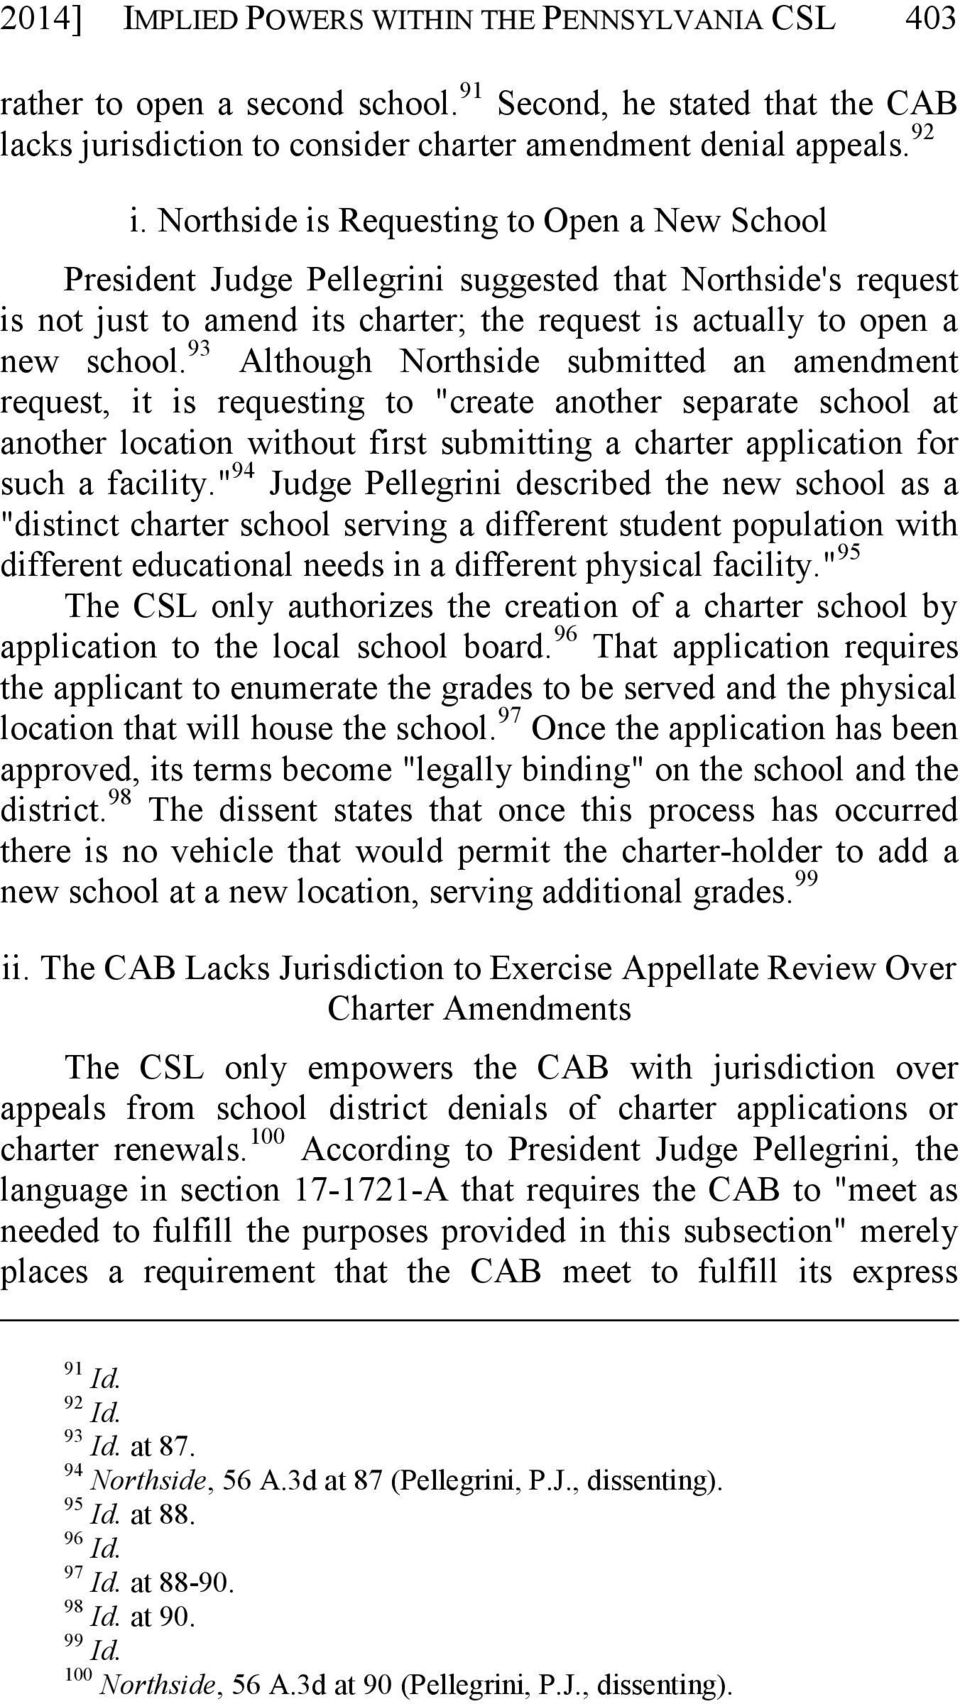 93 Although Northside submitted an amendment request, it is requesting to "create another separate school at another location without first submitting a charter application for such a facility.